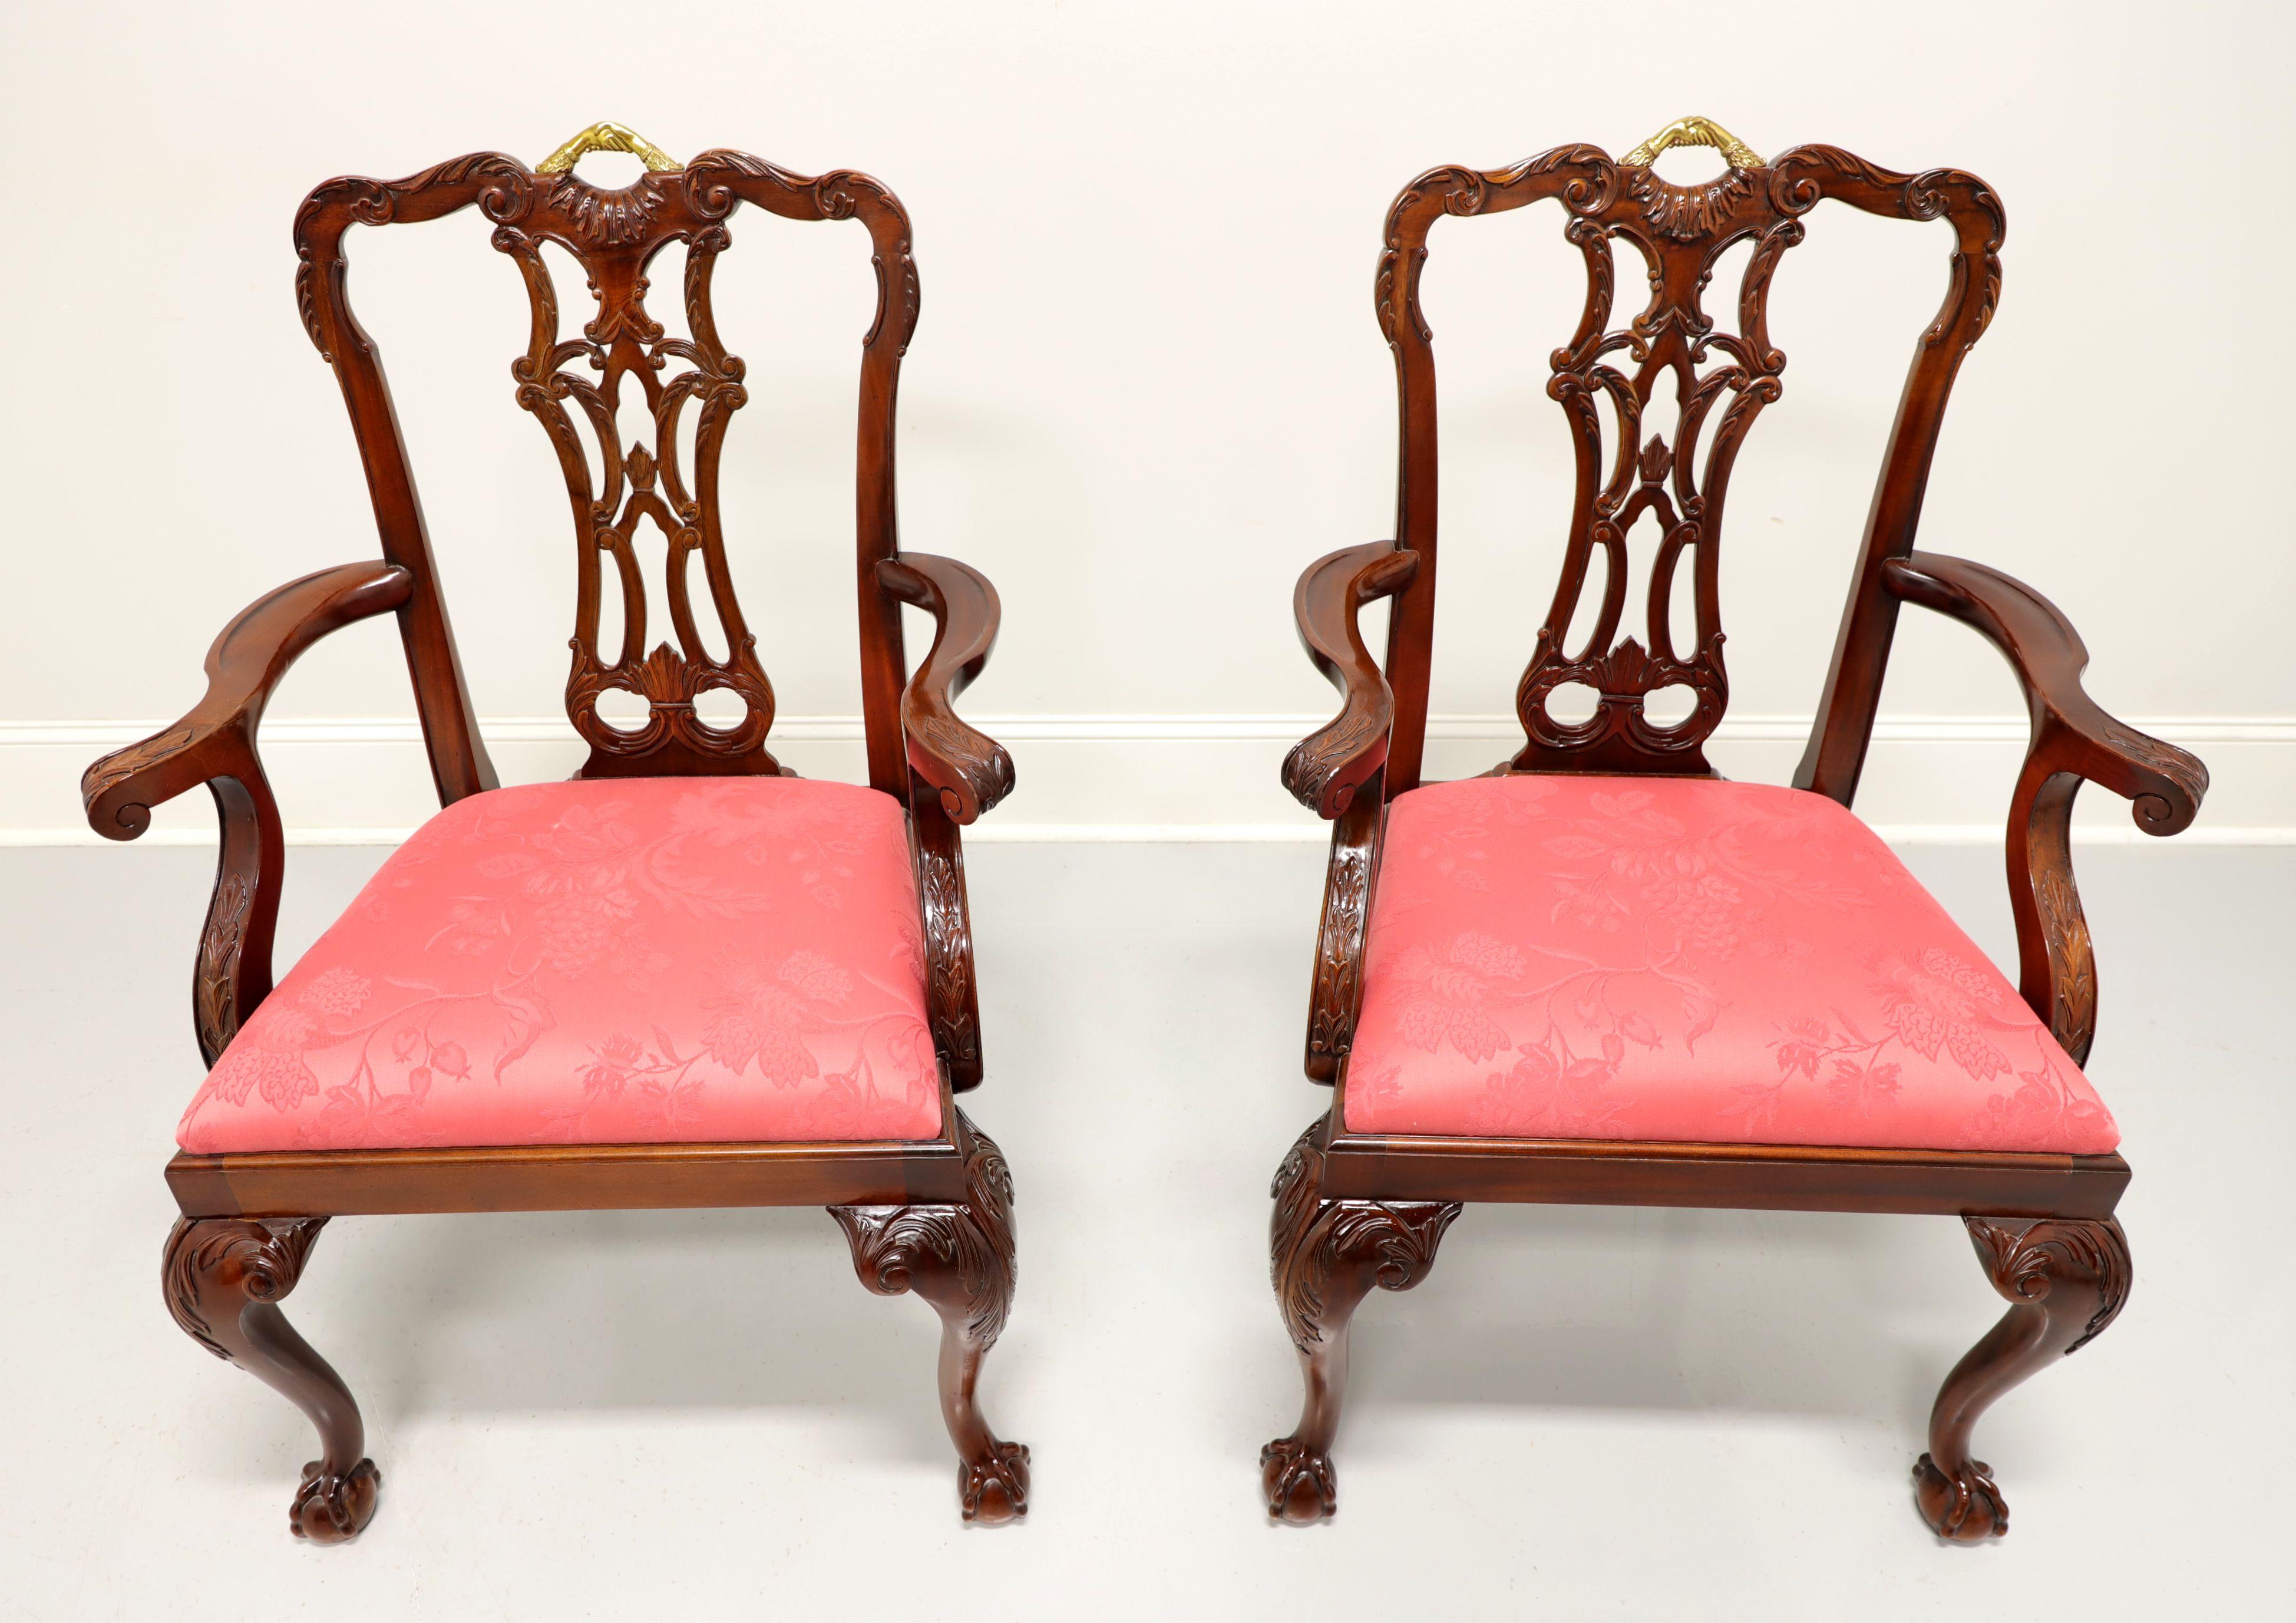 A pair of Chippendale style dining armchairs by Maitland Smith. Solid mahogany with carved crest rails, gold painted handle on top, carved backs, rose color brocade like fabric upholstered seats, carved acanthus leaf to knees, curved legs and ball